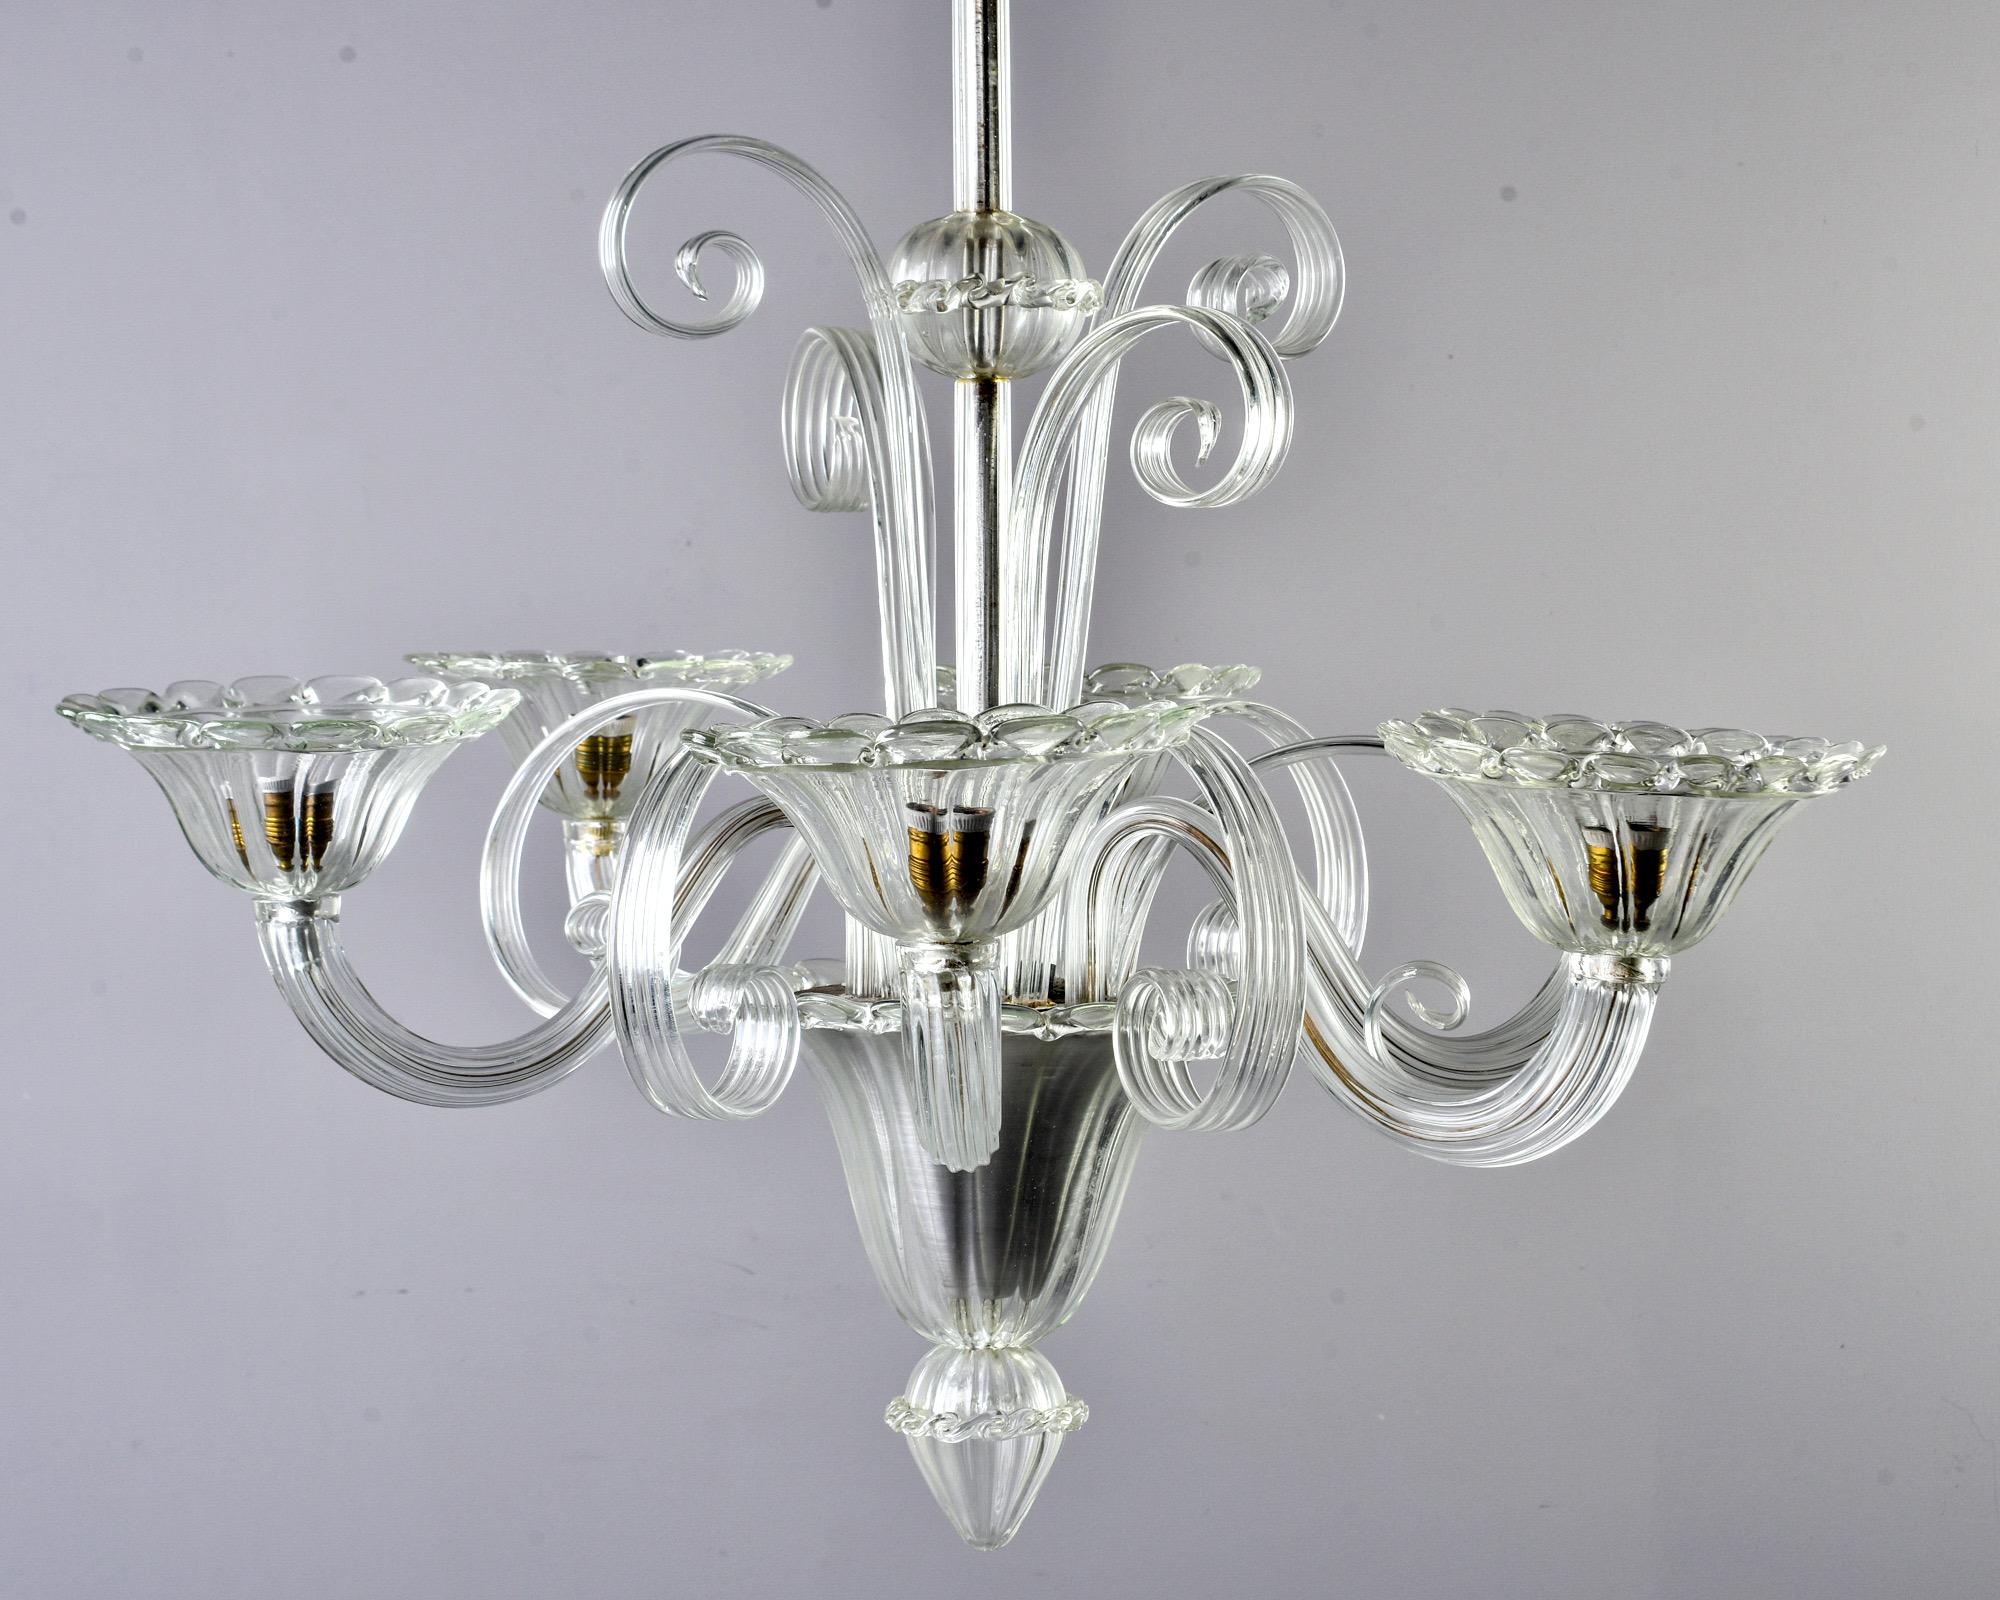 Murano chandelier in clear, mouth blown glass, circa 1960s. Original ceiling canopy, top tier of curled stems and six curved arms with petal-edged bobeches. New wiring for US electrical standards. Unknown maker.